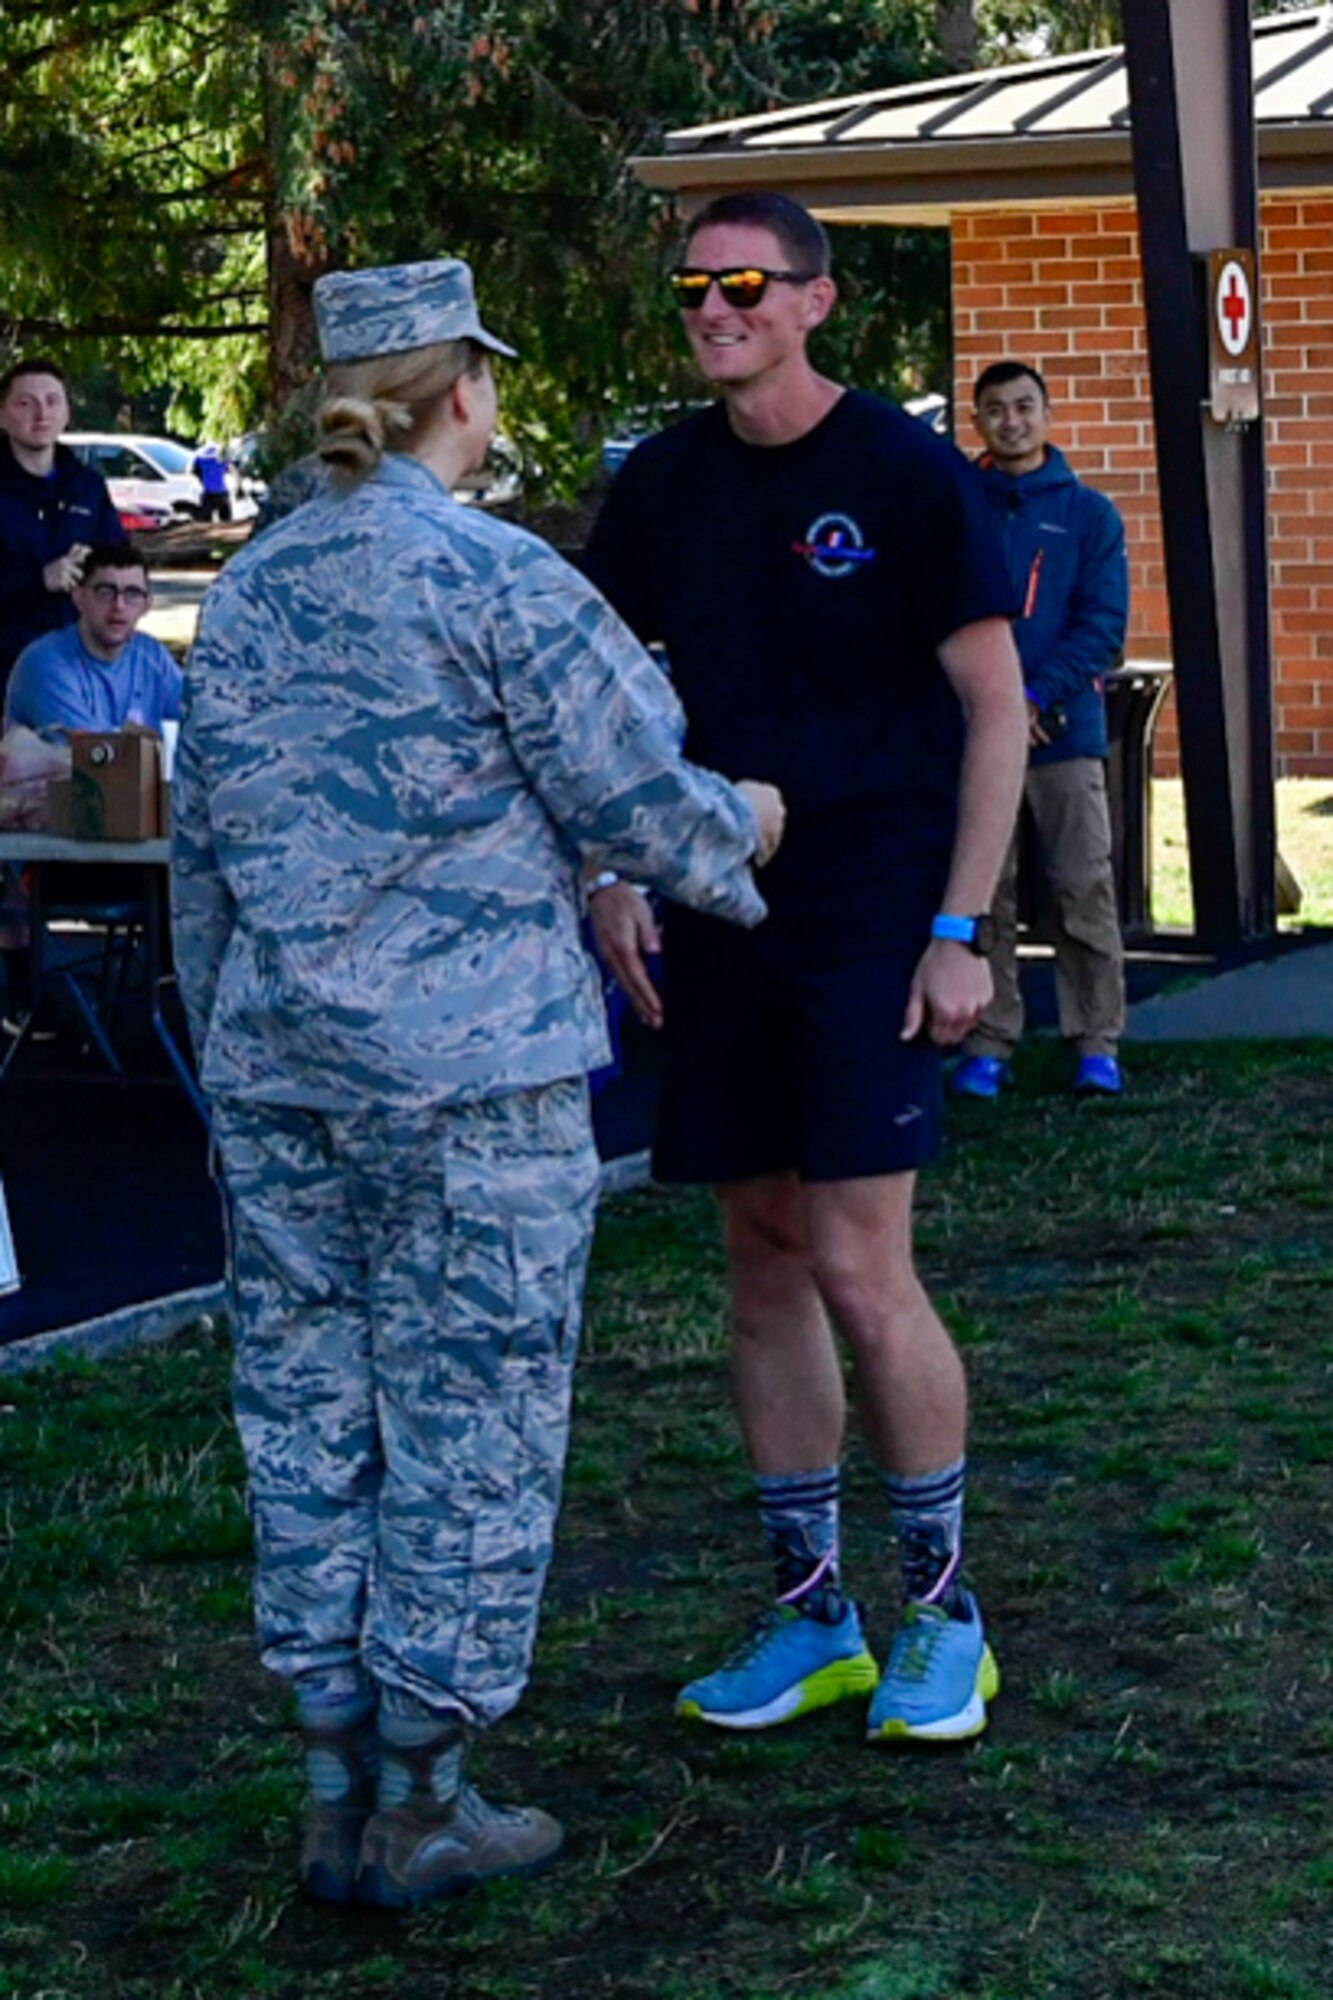 1st Lt. Krosby Keller, right, 225th Air Defense Squadron air battle manager, receives a commander's coin from Col. Erin Staine-Pyne, 62nd Airlift Wing vice commander, for placing first in the individual standings during the Joint Base Lewis-McChord 24-Hour POW/MIA Remembrance Run Sept. 19, 2018.  Keller logged in 100 miles in under 24 hours. (U.S. Air National Guard photo by Maj. Kimberly Burke)